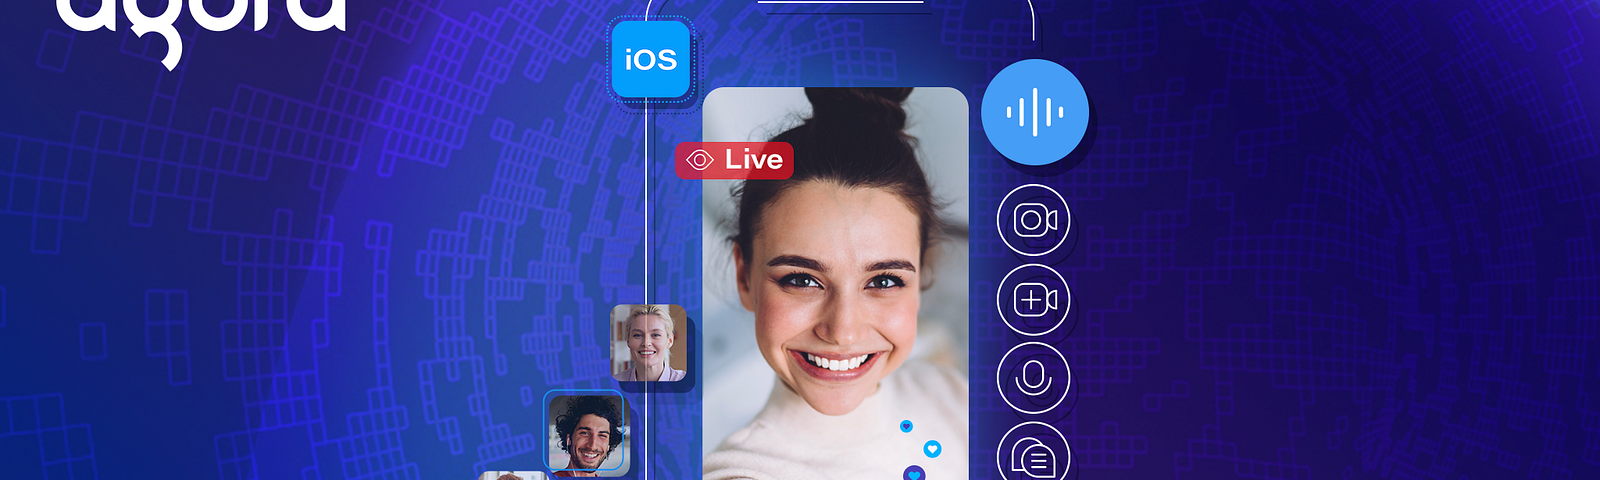 banner image, showing a live streaming app